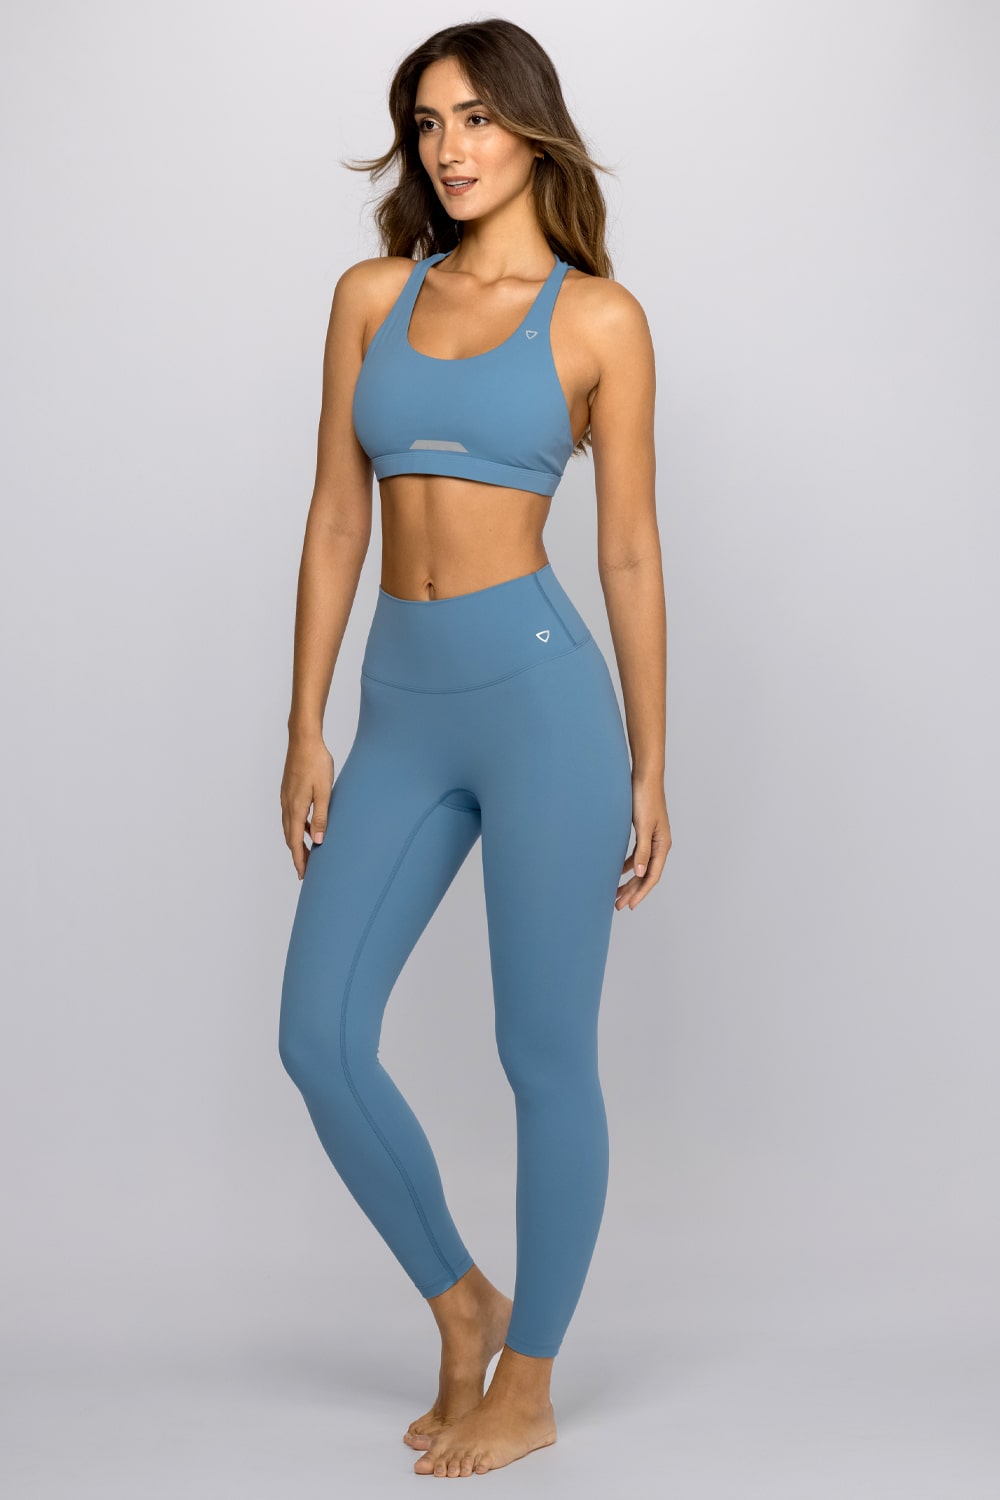 Luxana Sky Blue Outfit